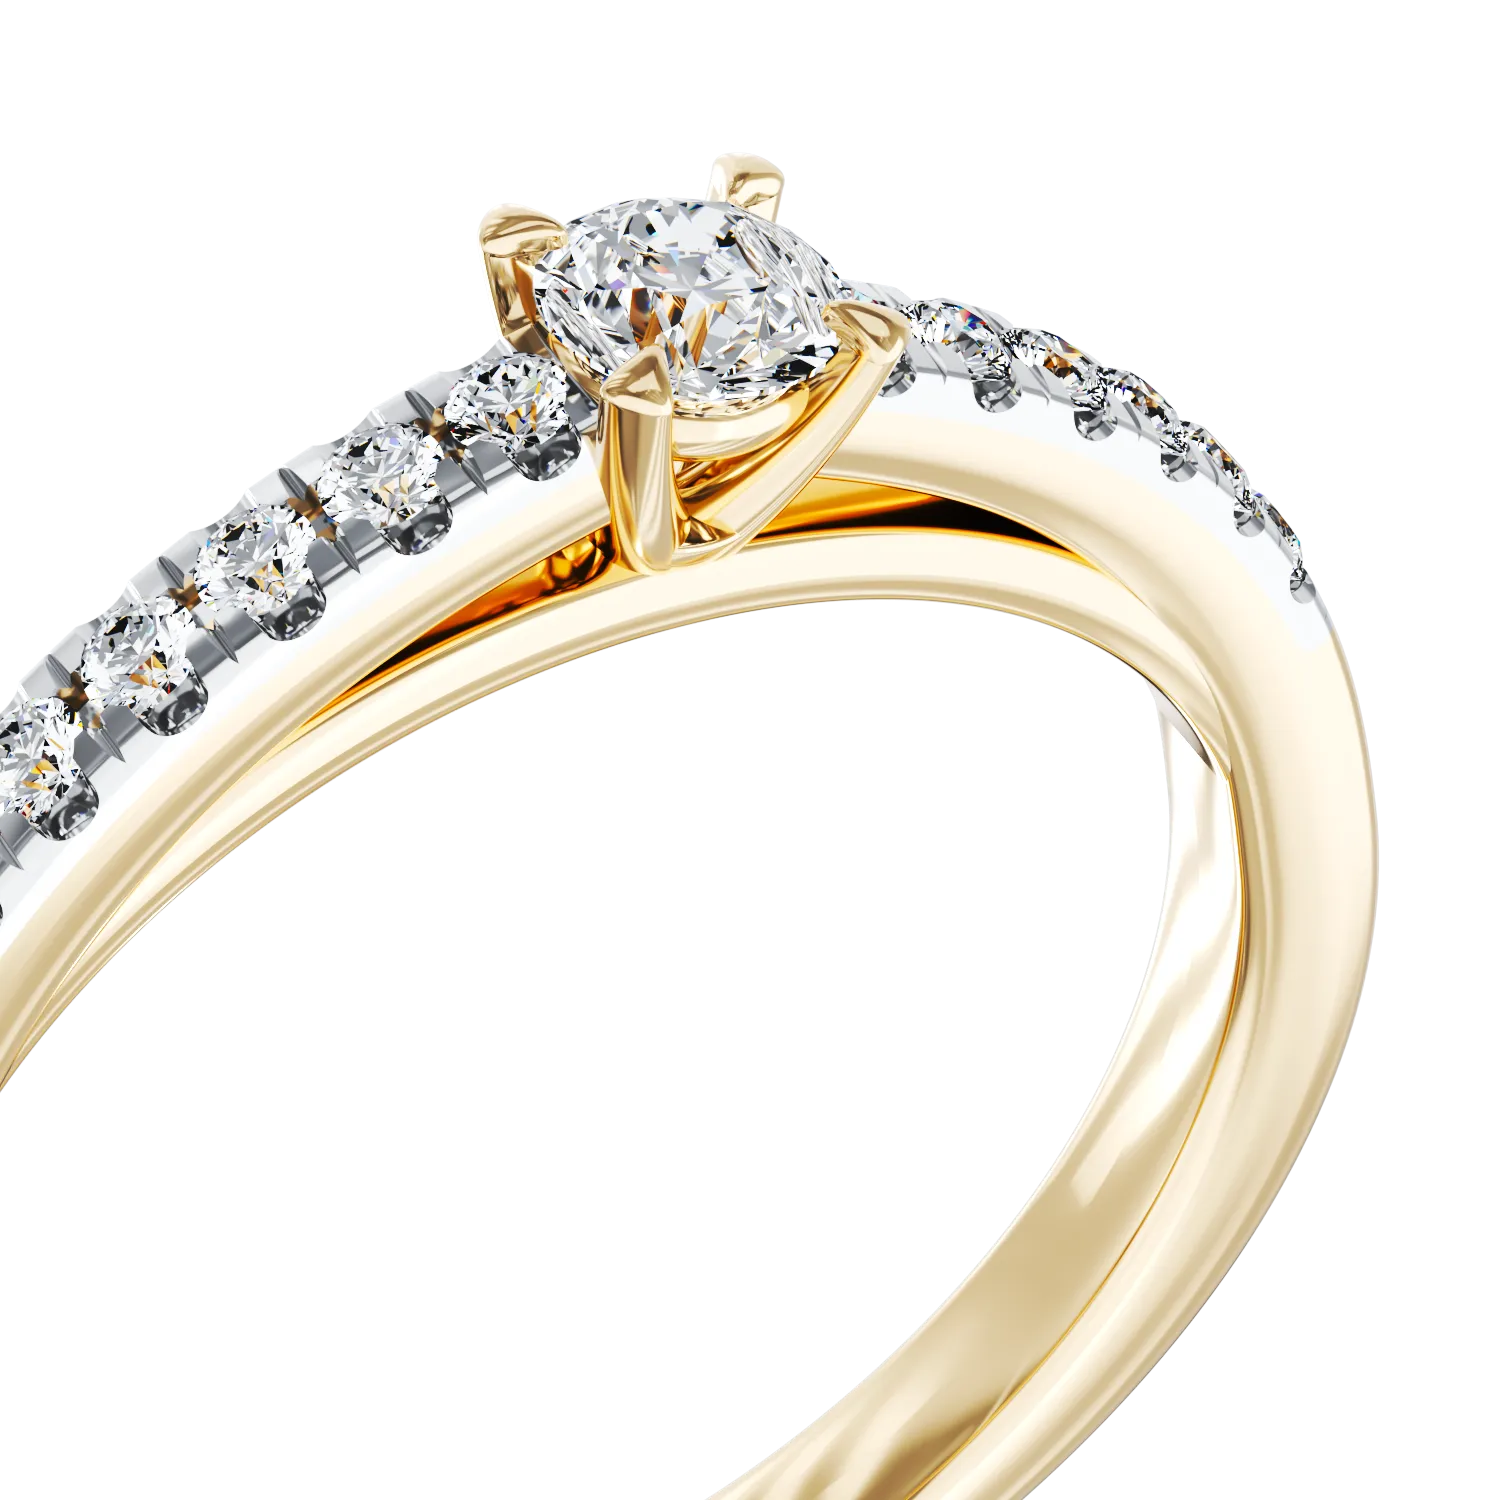 18K yellow gold engagement ring with 0.3ct diamond and 0.14ct diamonds